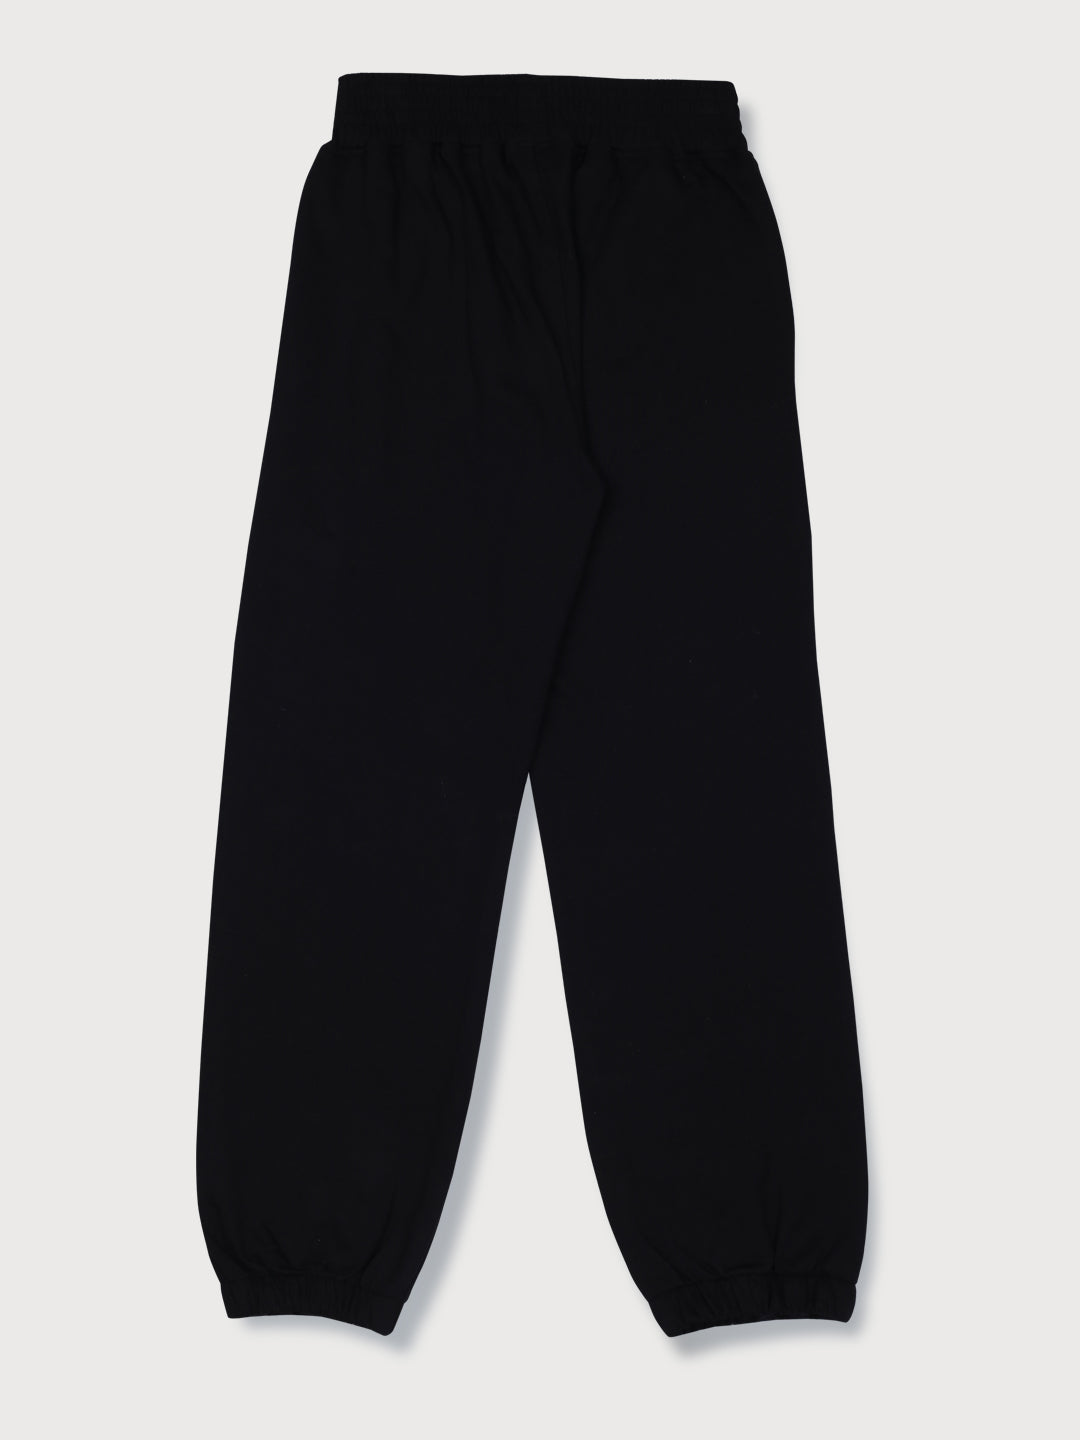 Girls Black Cotton Solid Elasticated Track Pant